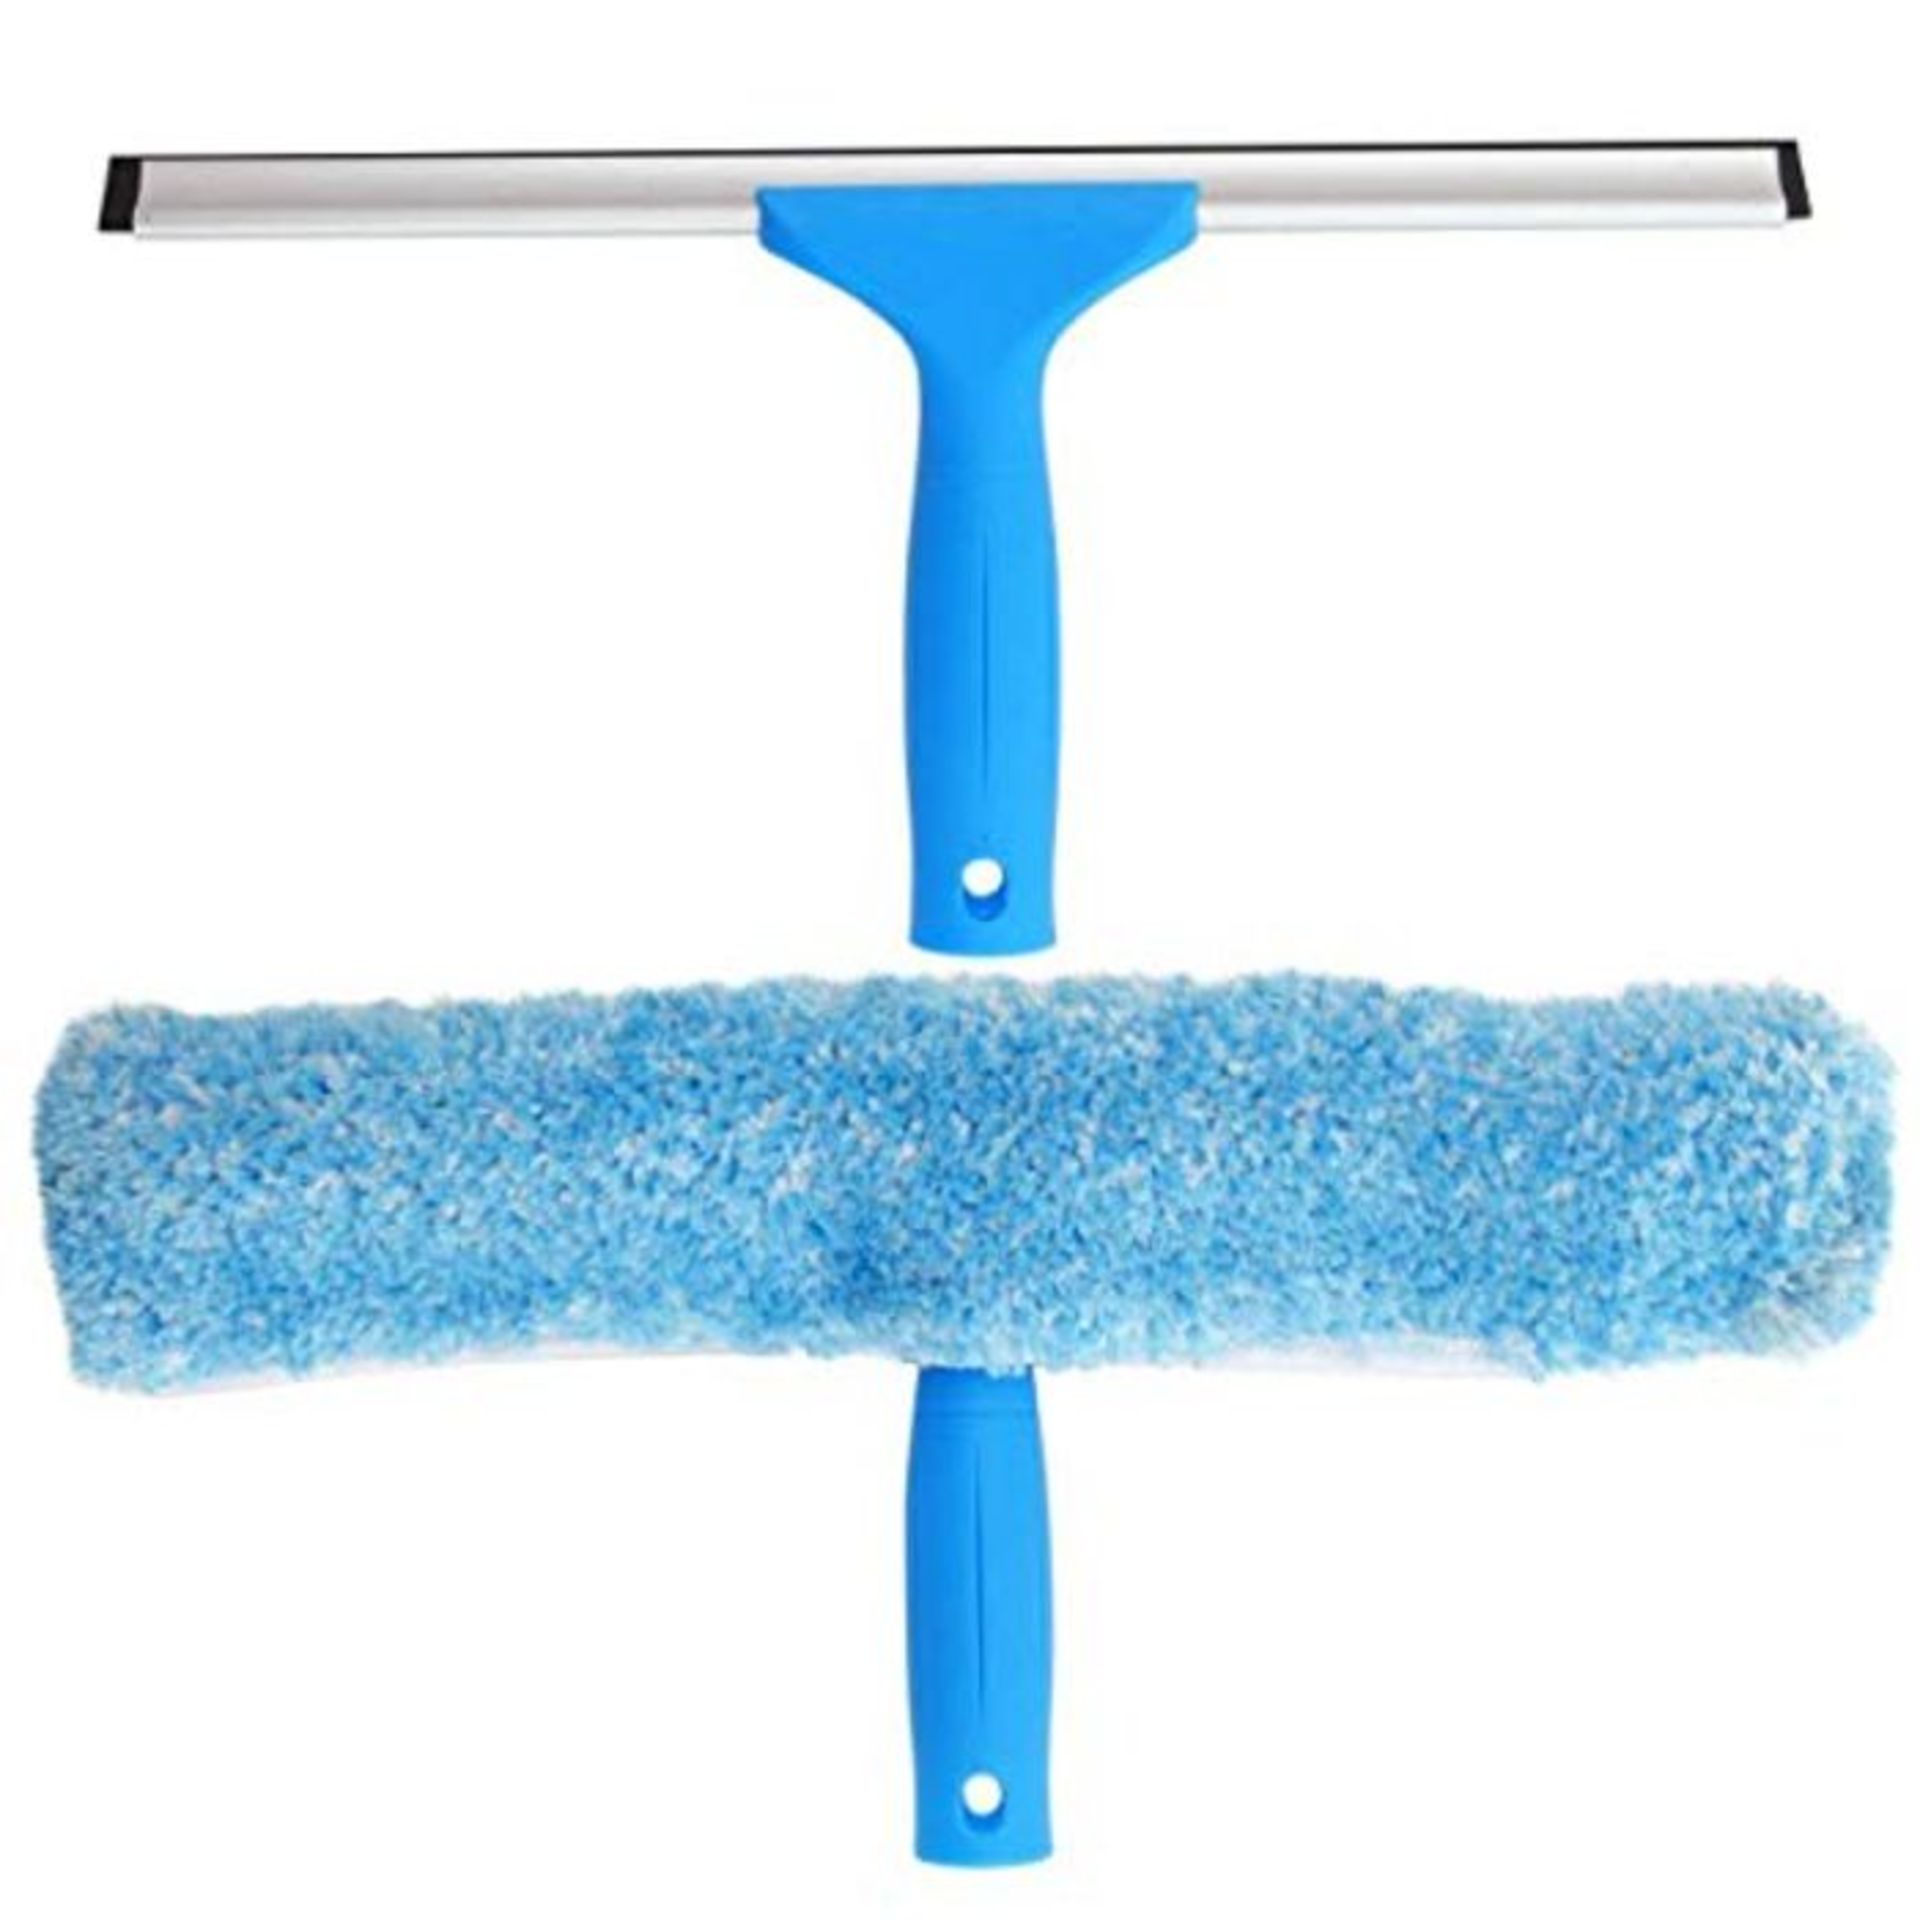 [INCOMPLETE] MR.SIGA Professional Window Cleaning Combo - Squeegee & Microfiber Window